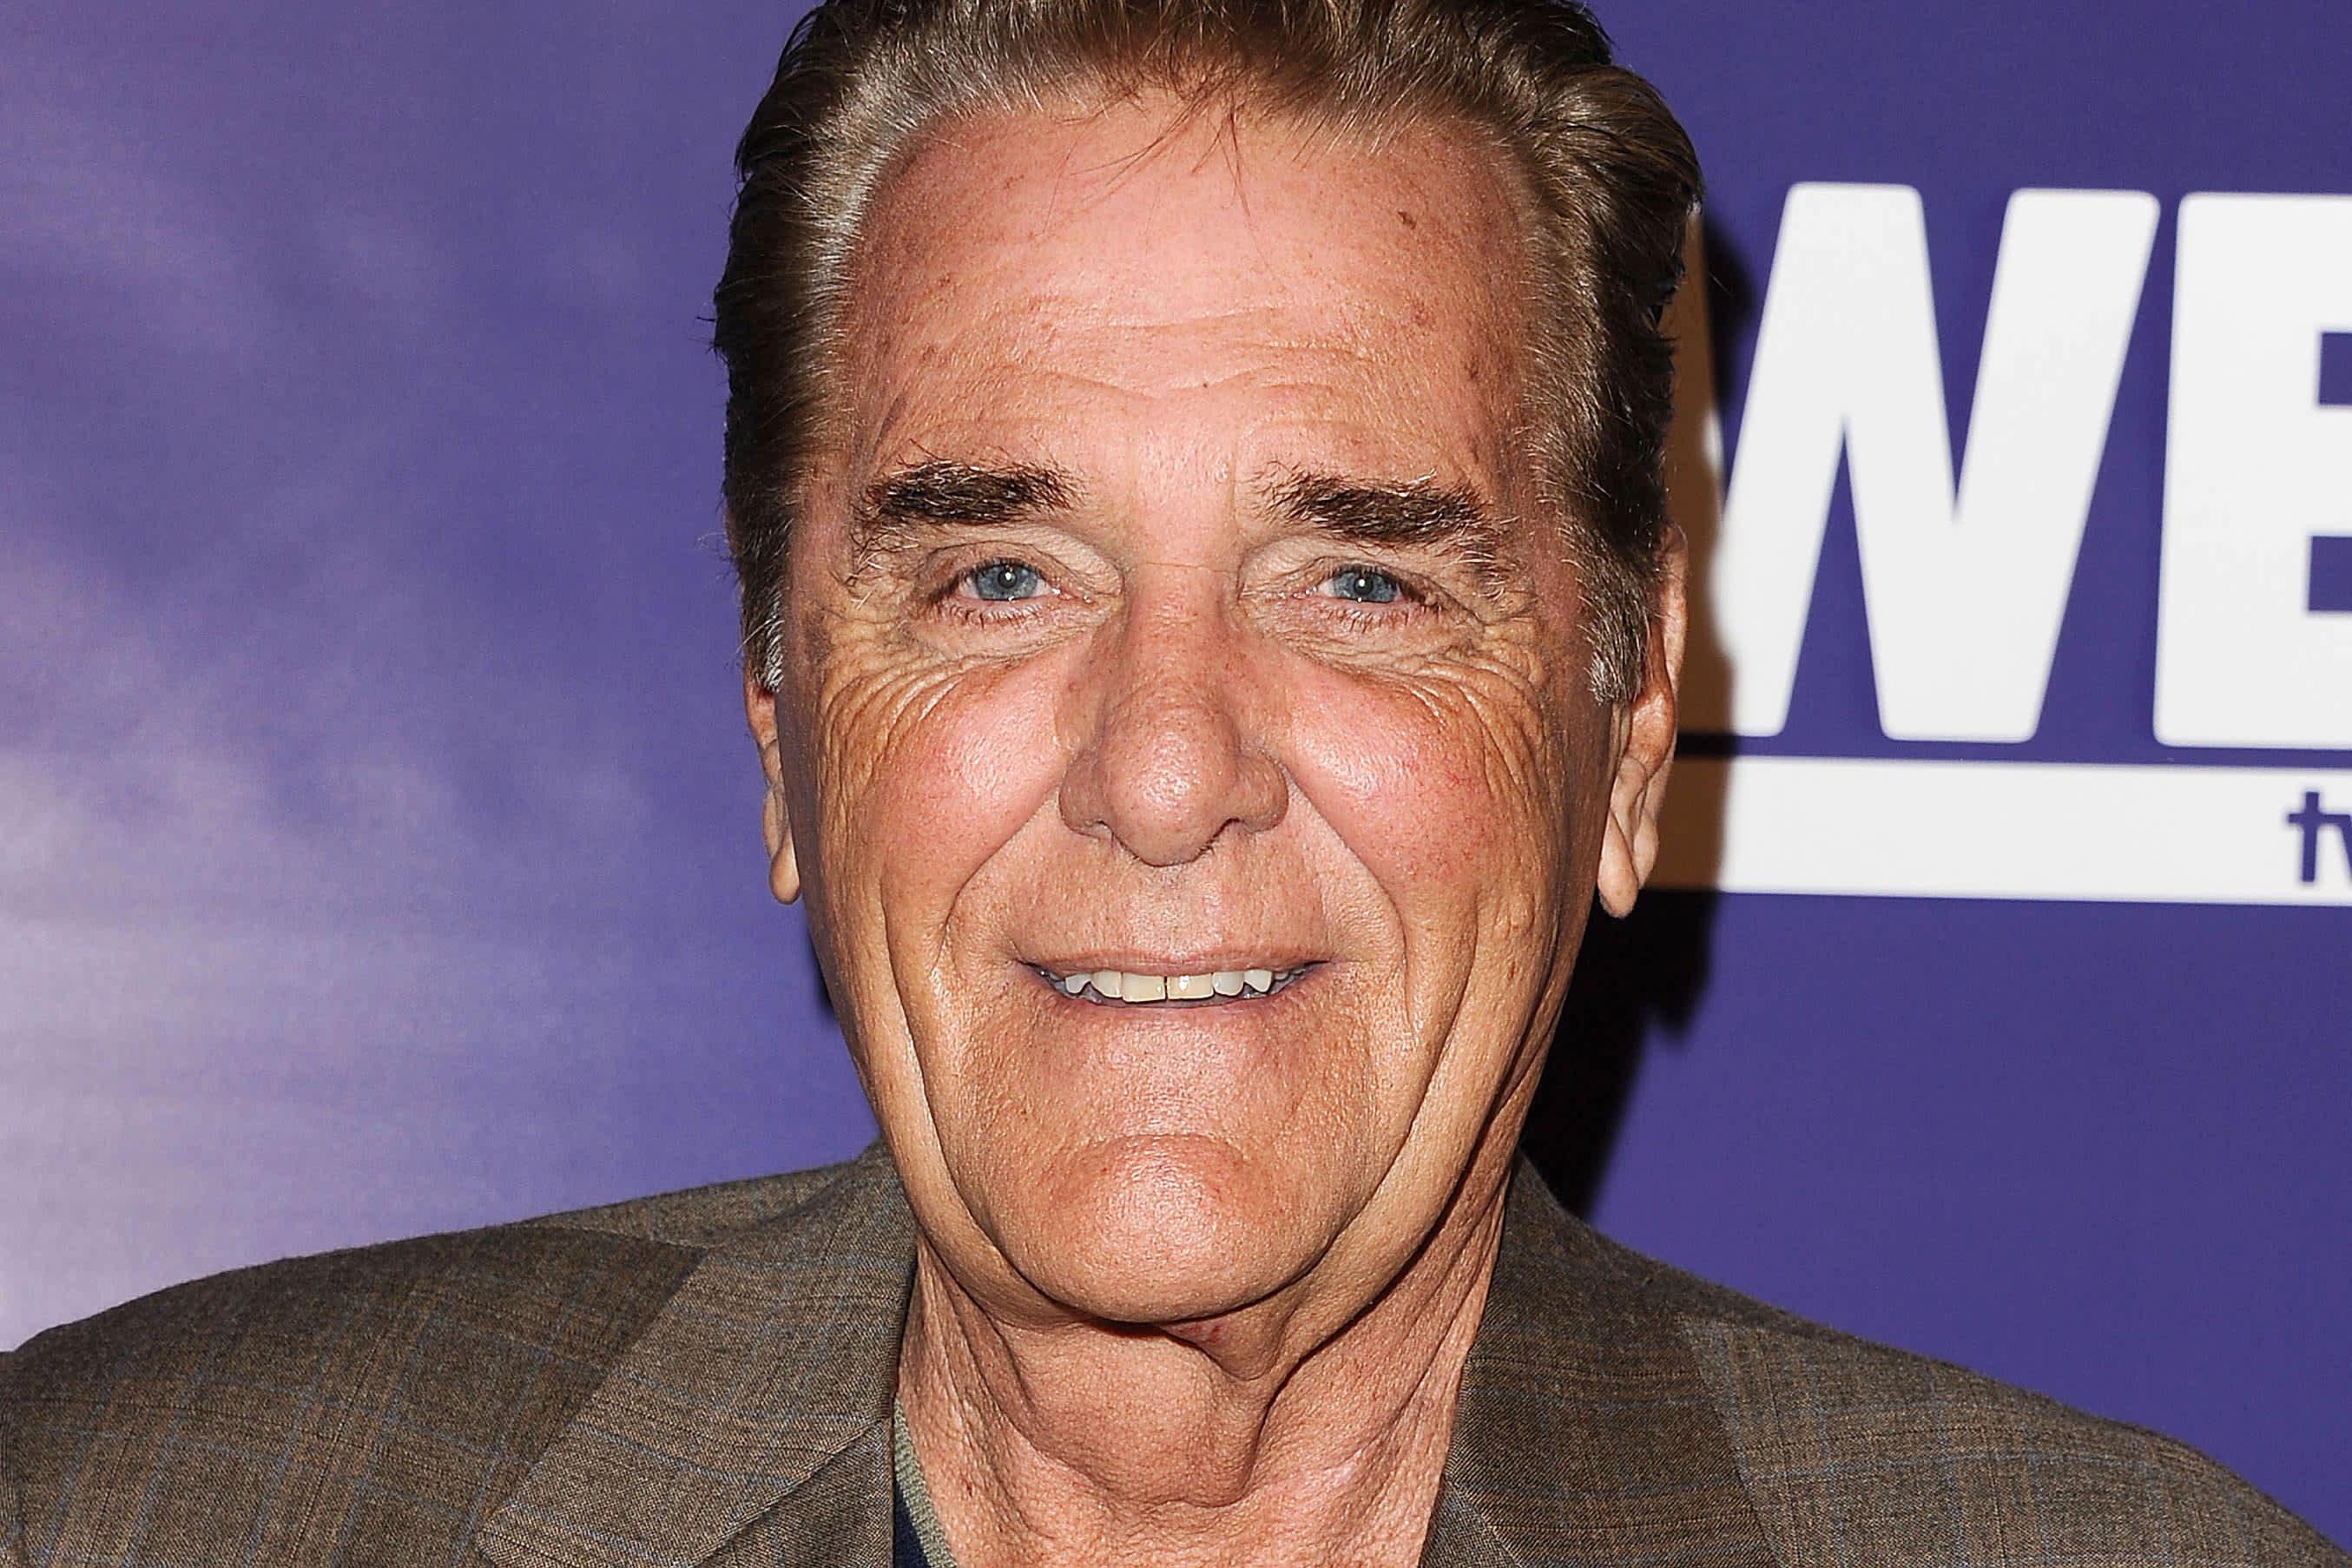 Kim Woolery's husband Chuck Woolery at an event